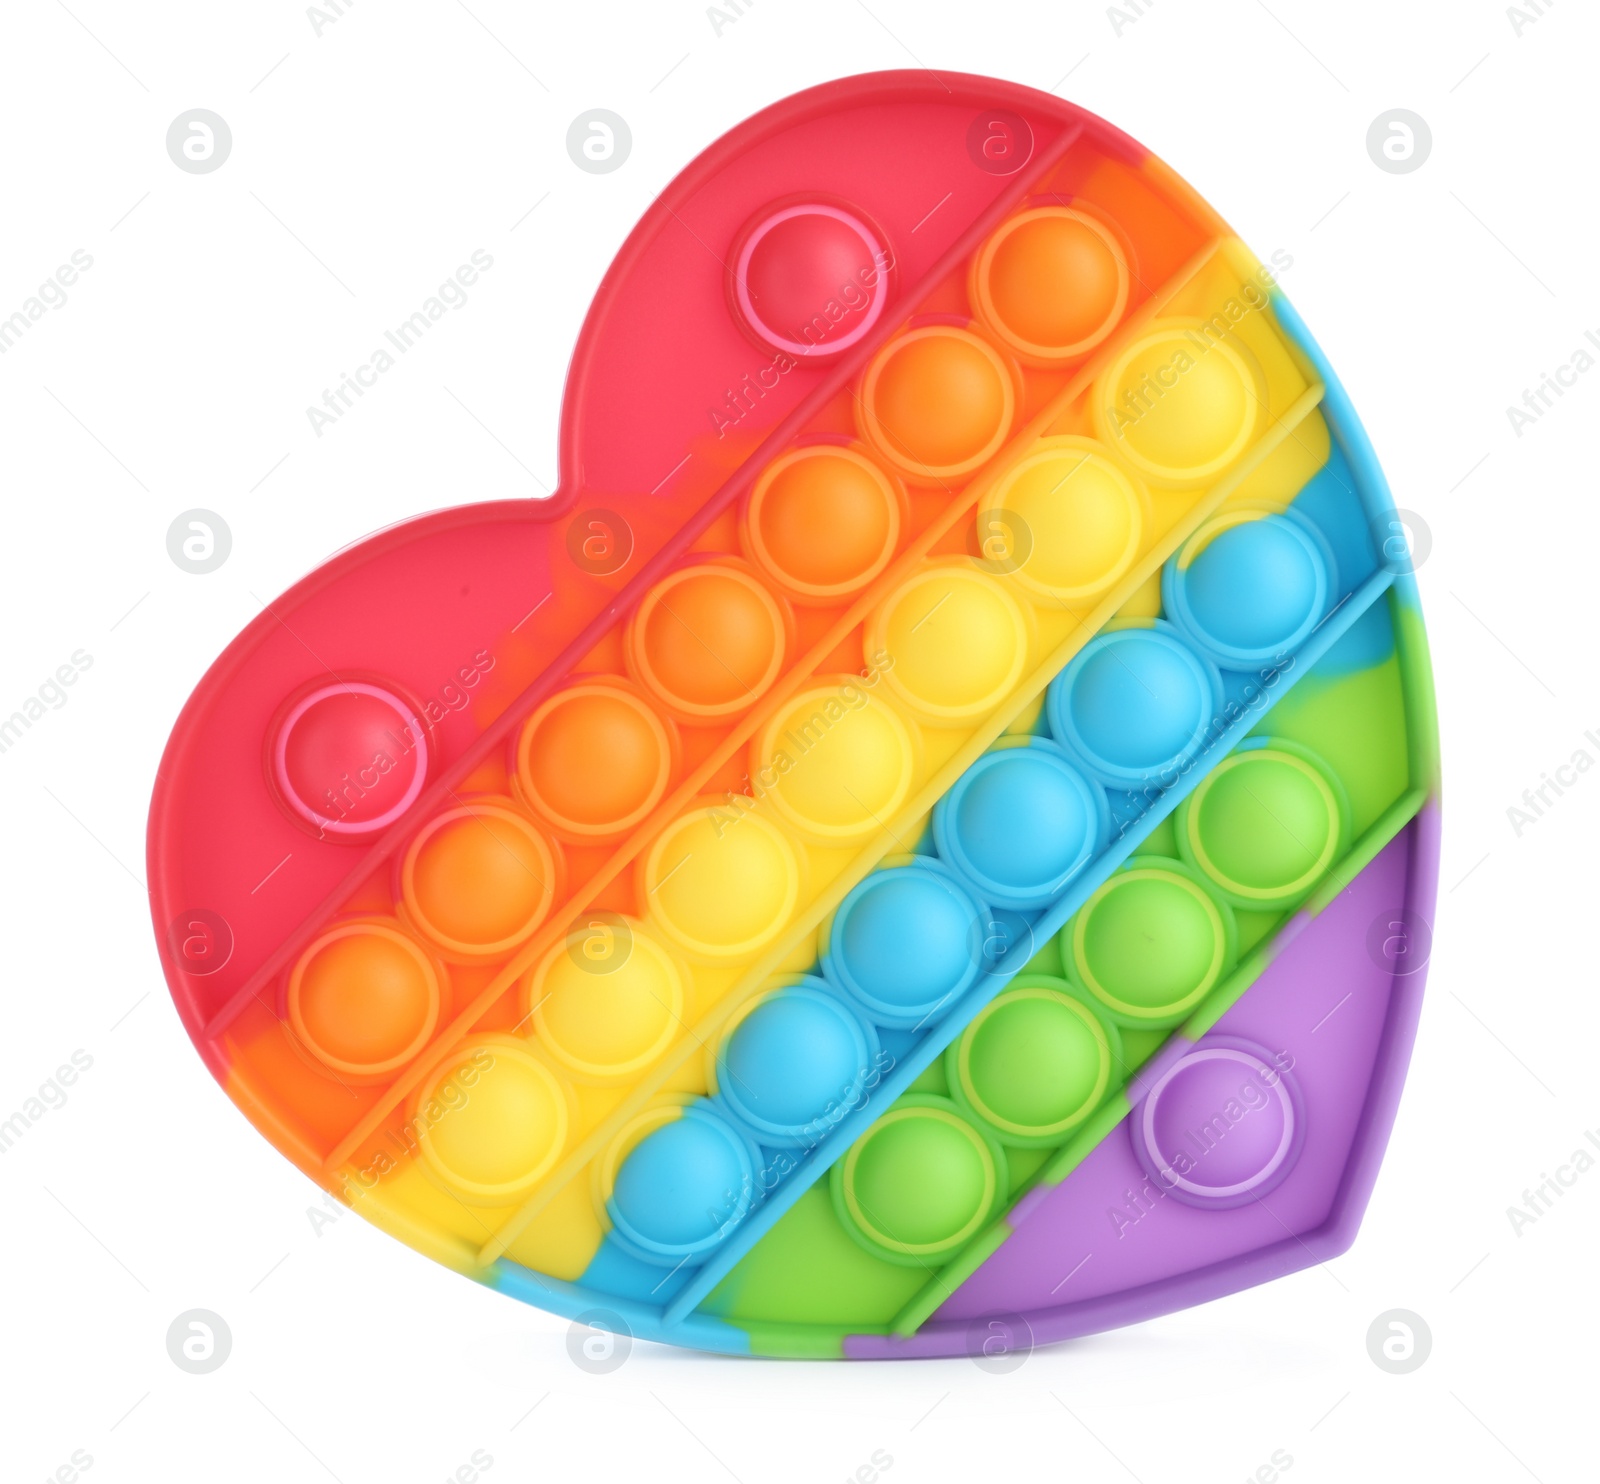 Photo of Heart shaped rainbow pop it fidget toy isolated on white, top view